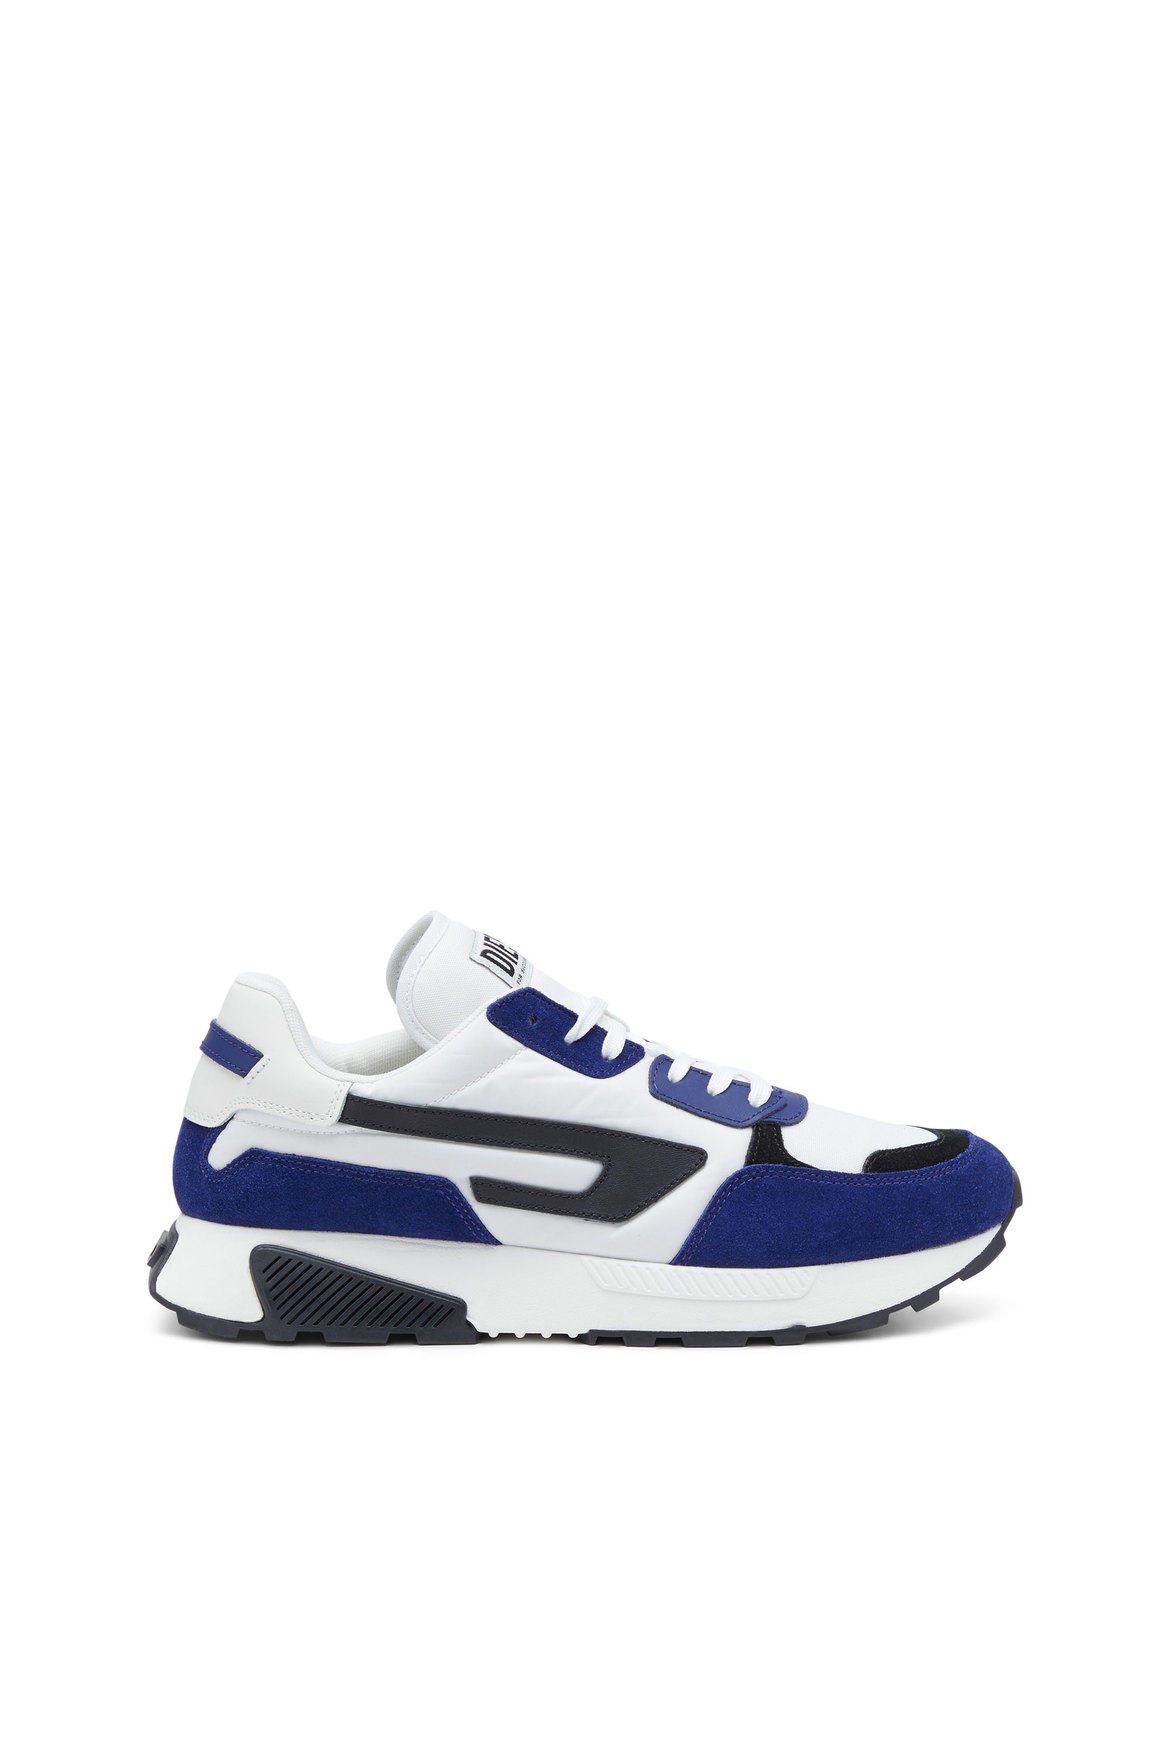 S-Tyche LL - Running sneakers with D logo | Diesel